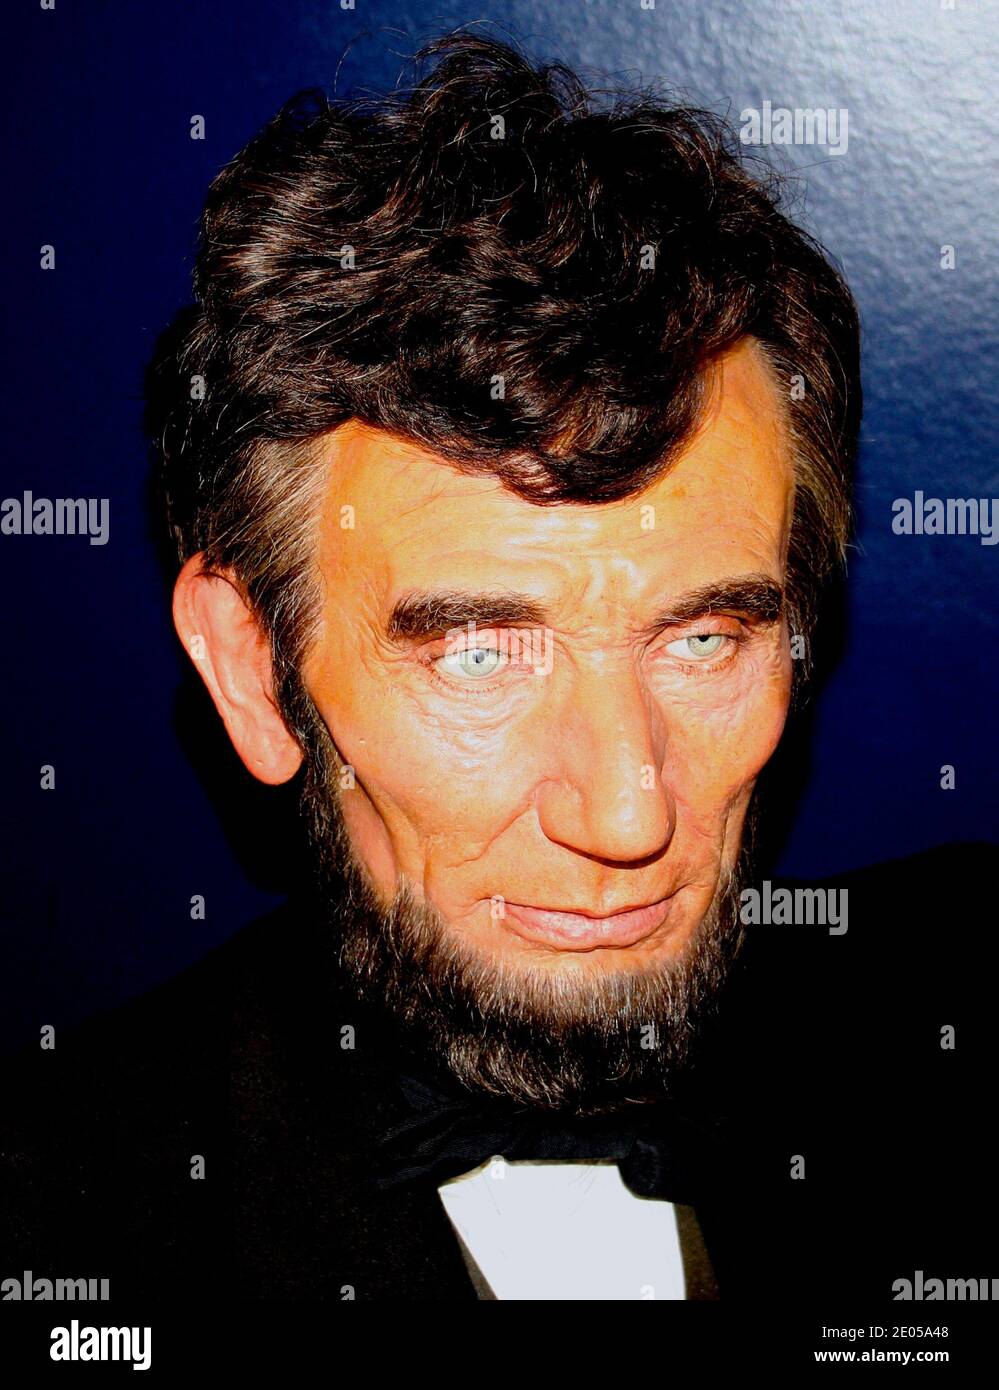 Close up of the waxwork head of Abraham Lincoln 16th President of the United States Madame Tussauds London England UK Stock Photo